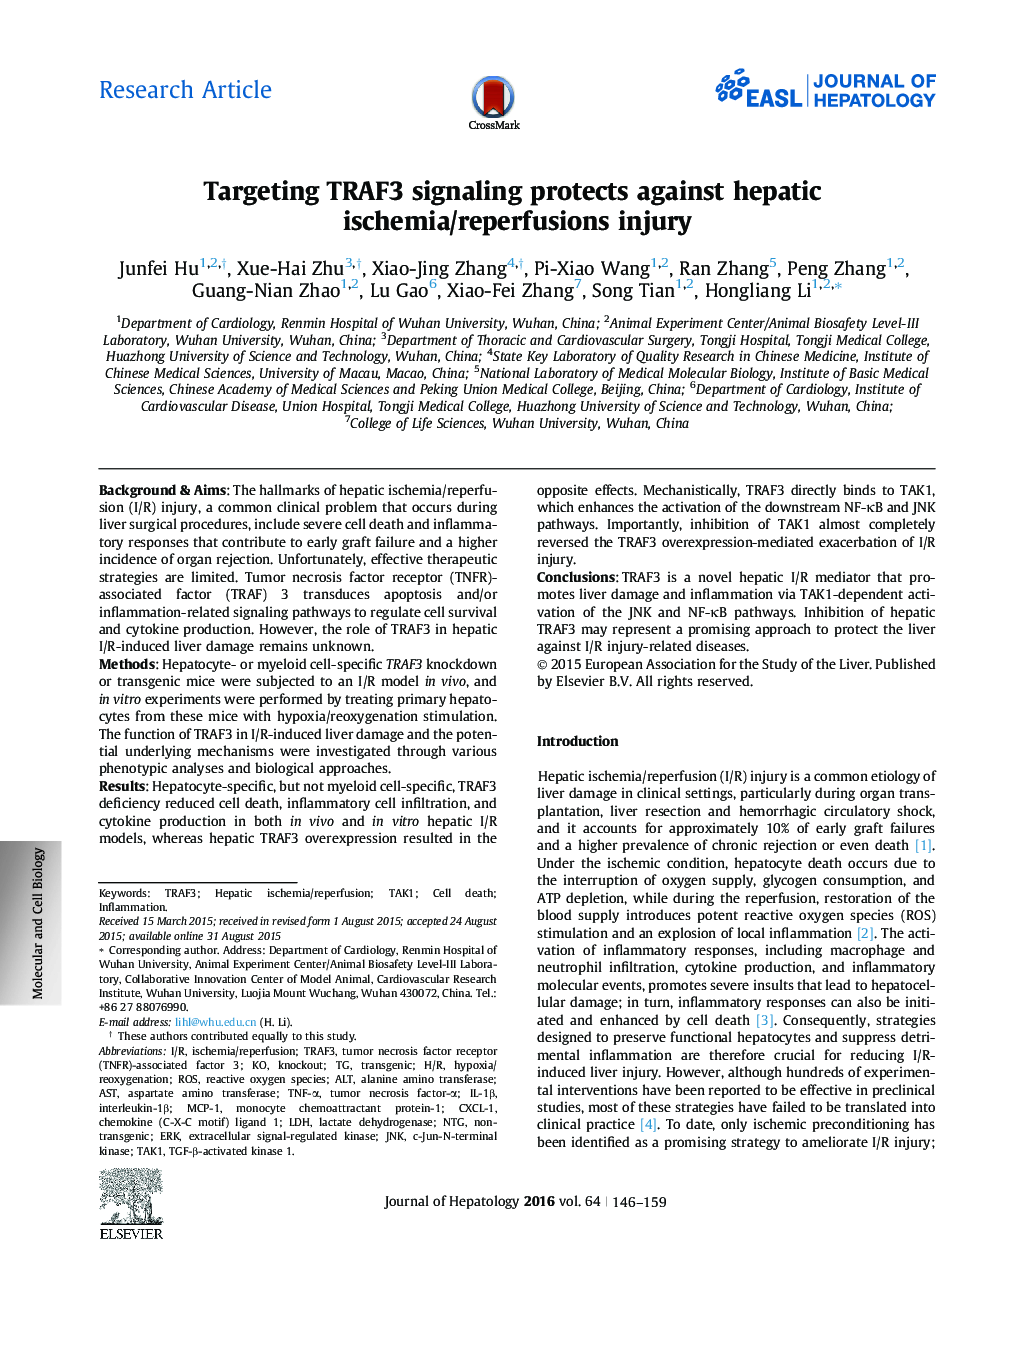 Research ArticleTargeting TRAF3 signaling protects against hepatic ischemia/reperfusions injury